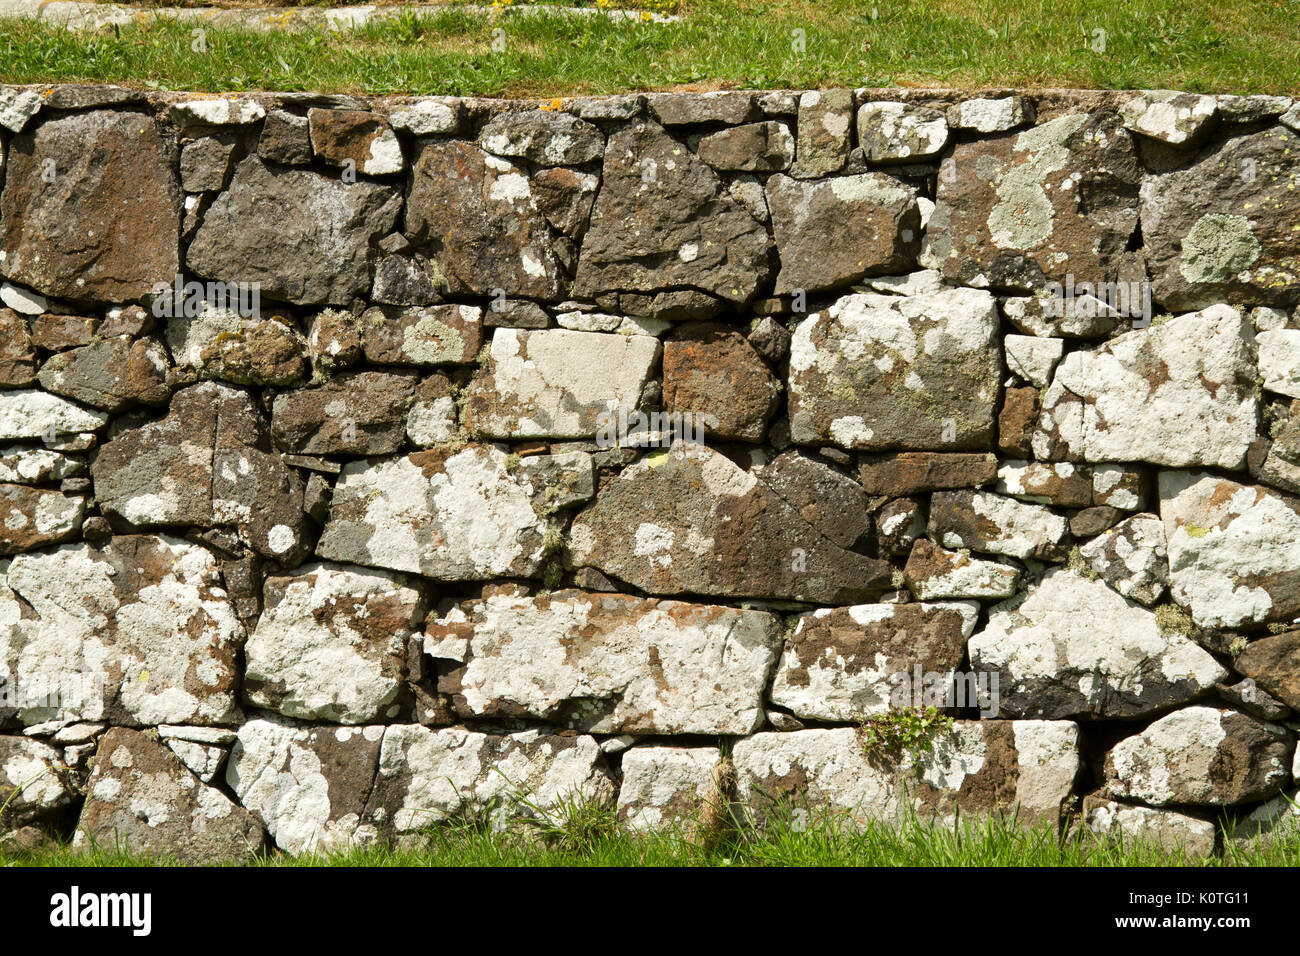 Section of dry stone wall, Scotland Stock Photo